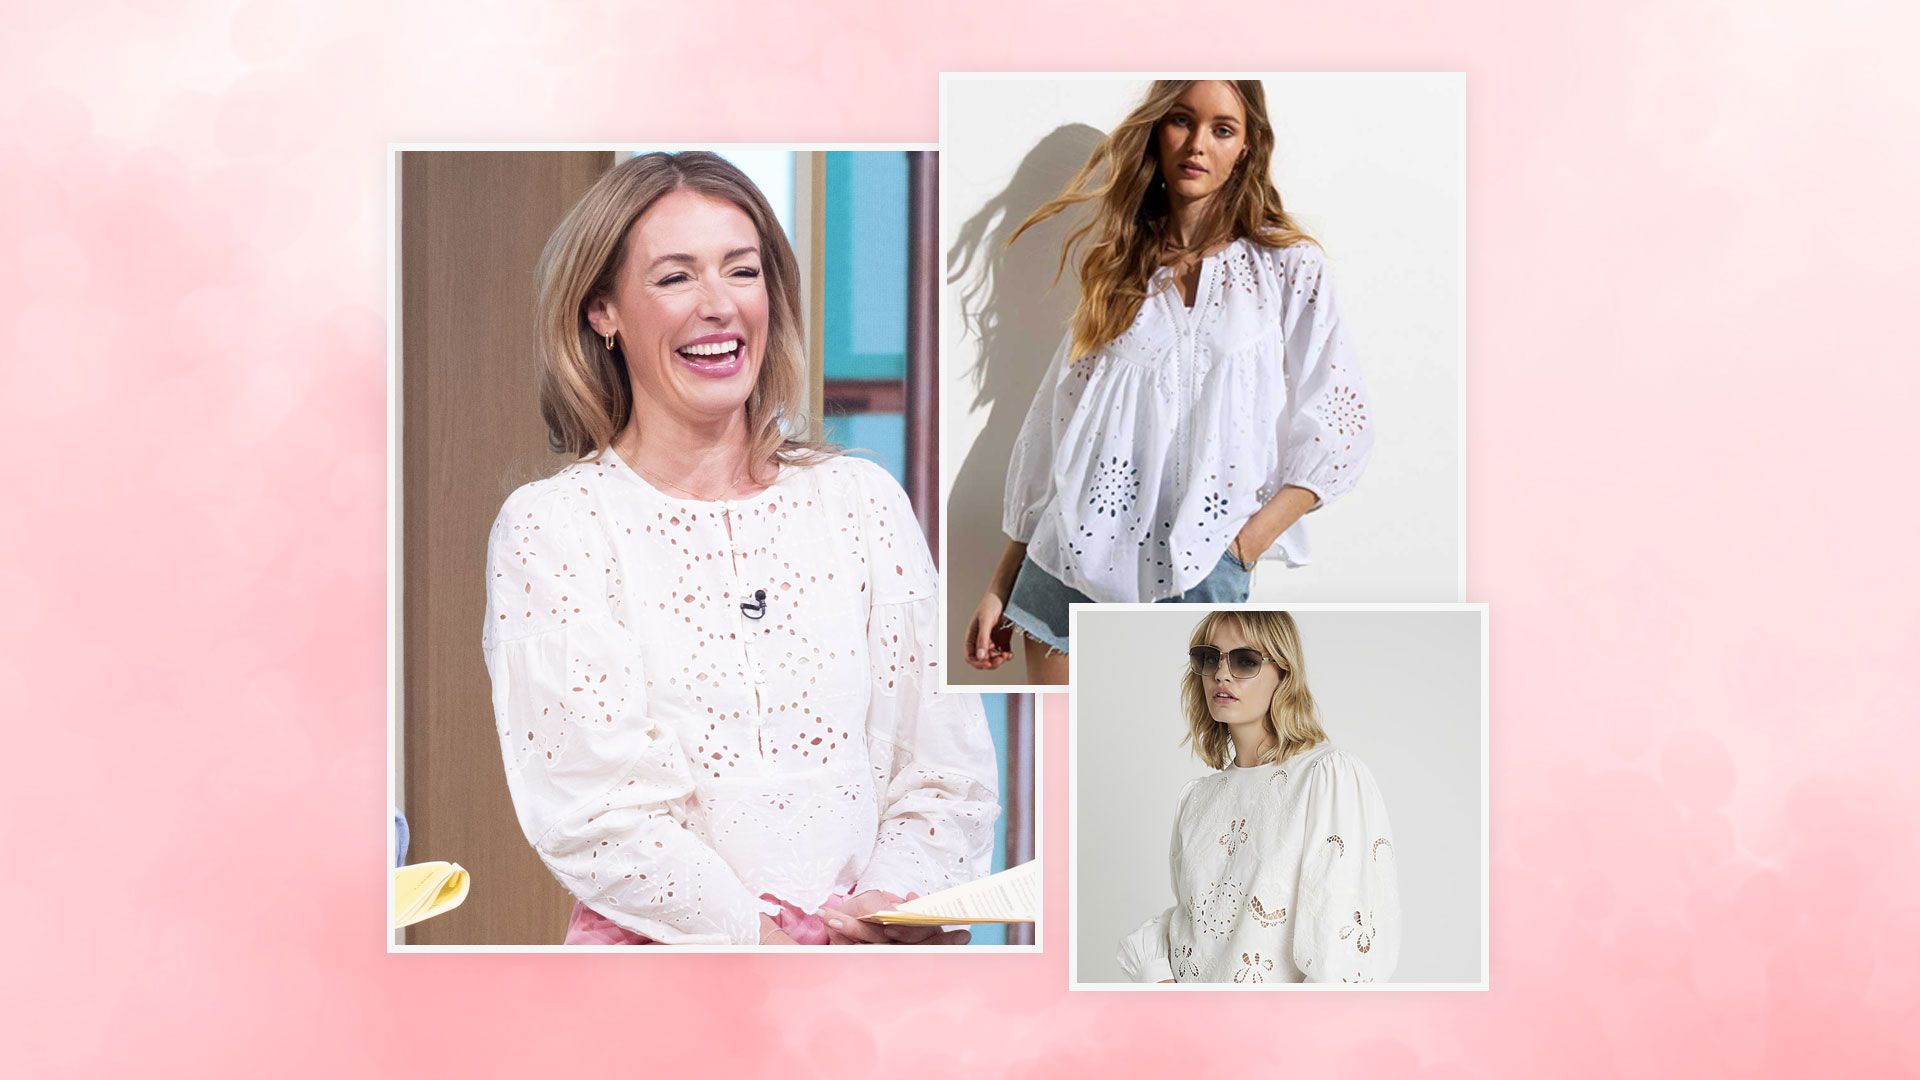 Cat Deeley's white high street blouse is boho chic – 3 broderie anglaise blouses to get Cat's vibe